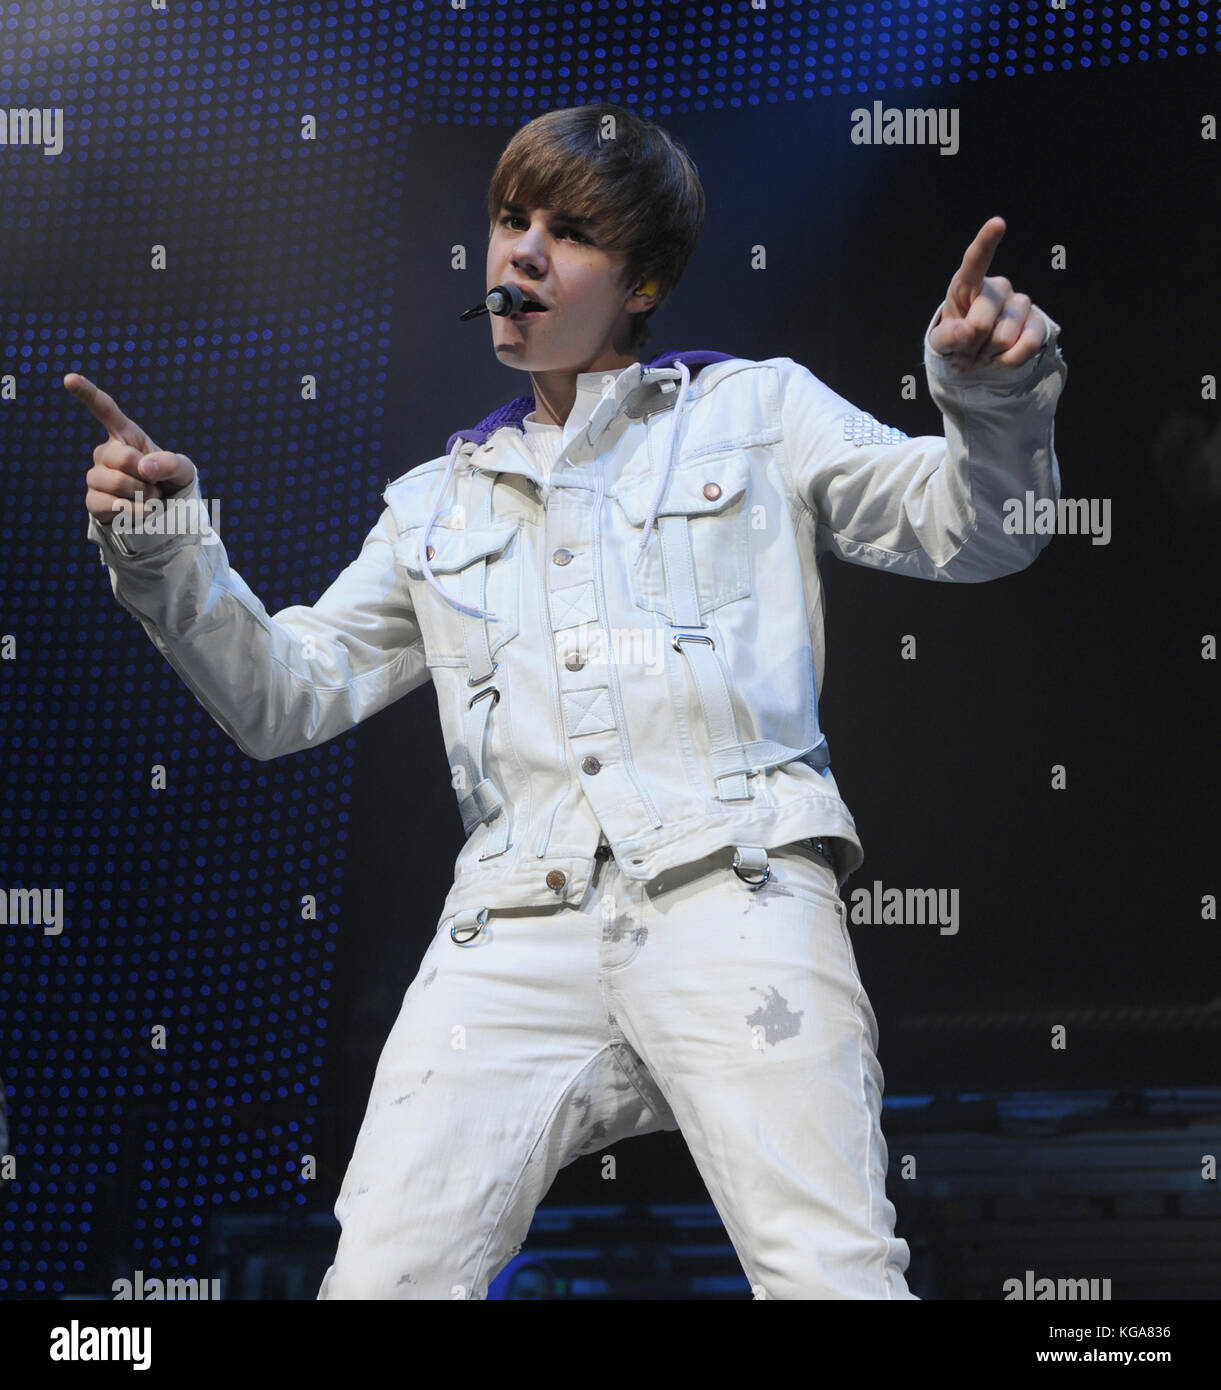 Justin Bieber in concert at the American Airlines Arena in Miami Florida. December 18, 2010.  People: Justin Bieber  Credit: Hoo-Me.com/MediaPunch Stock Photo